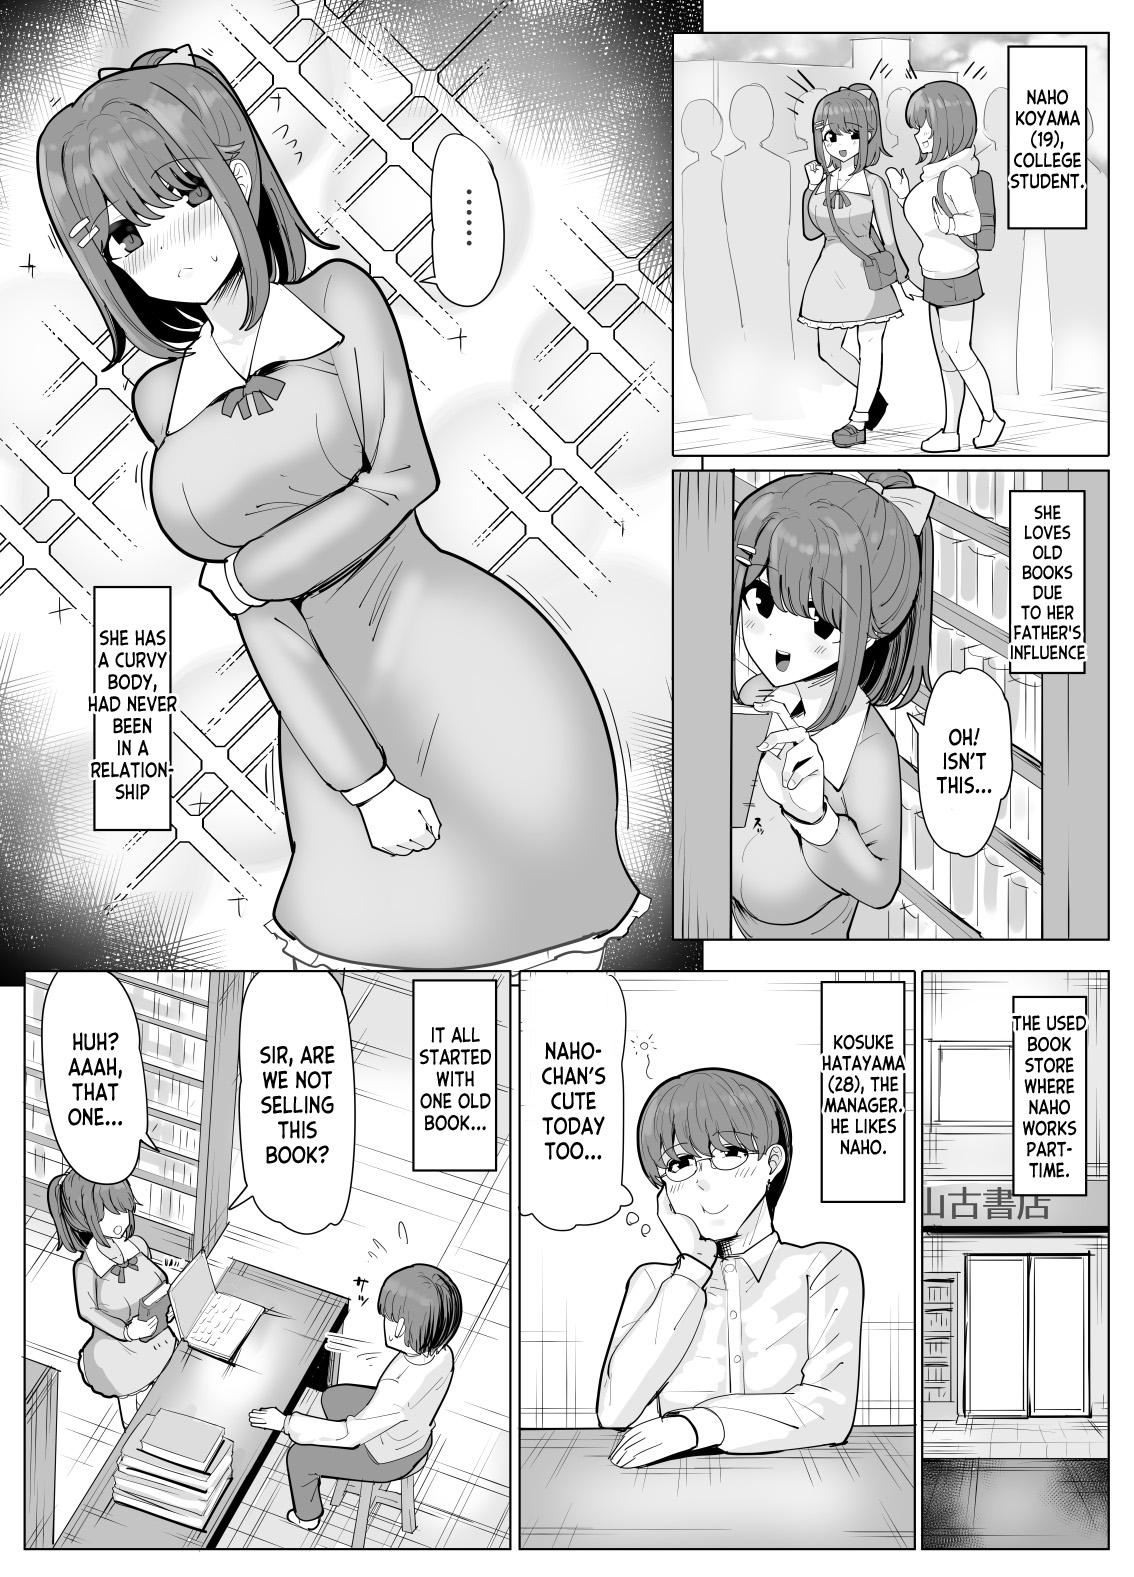 Office College Girl Taken Over by an Old Man 1+2 - Original Pakistani - Page 1